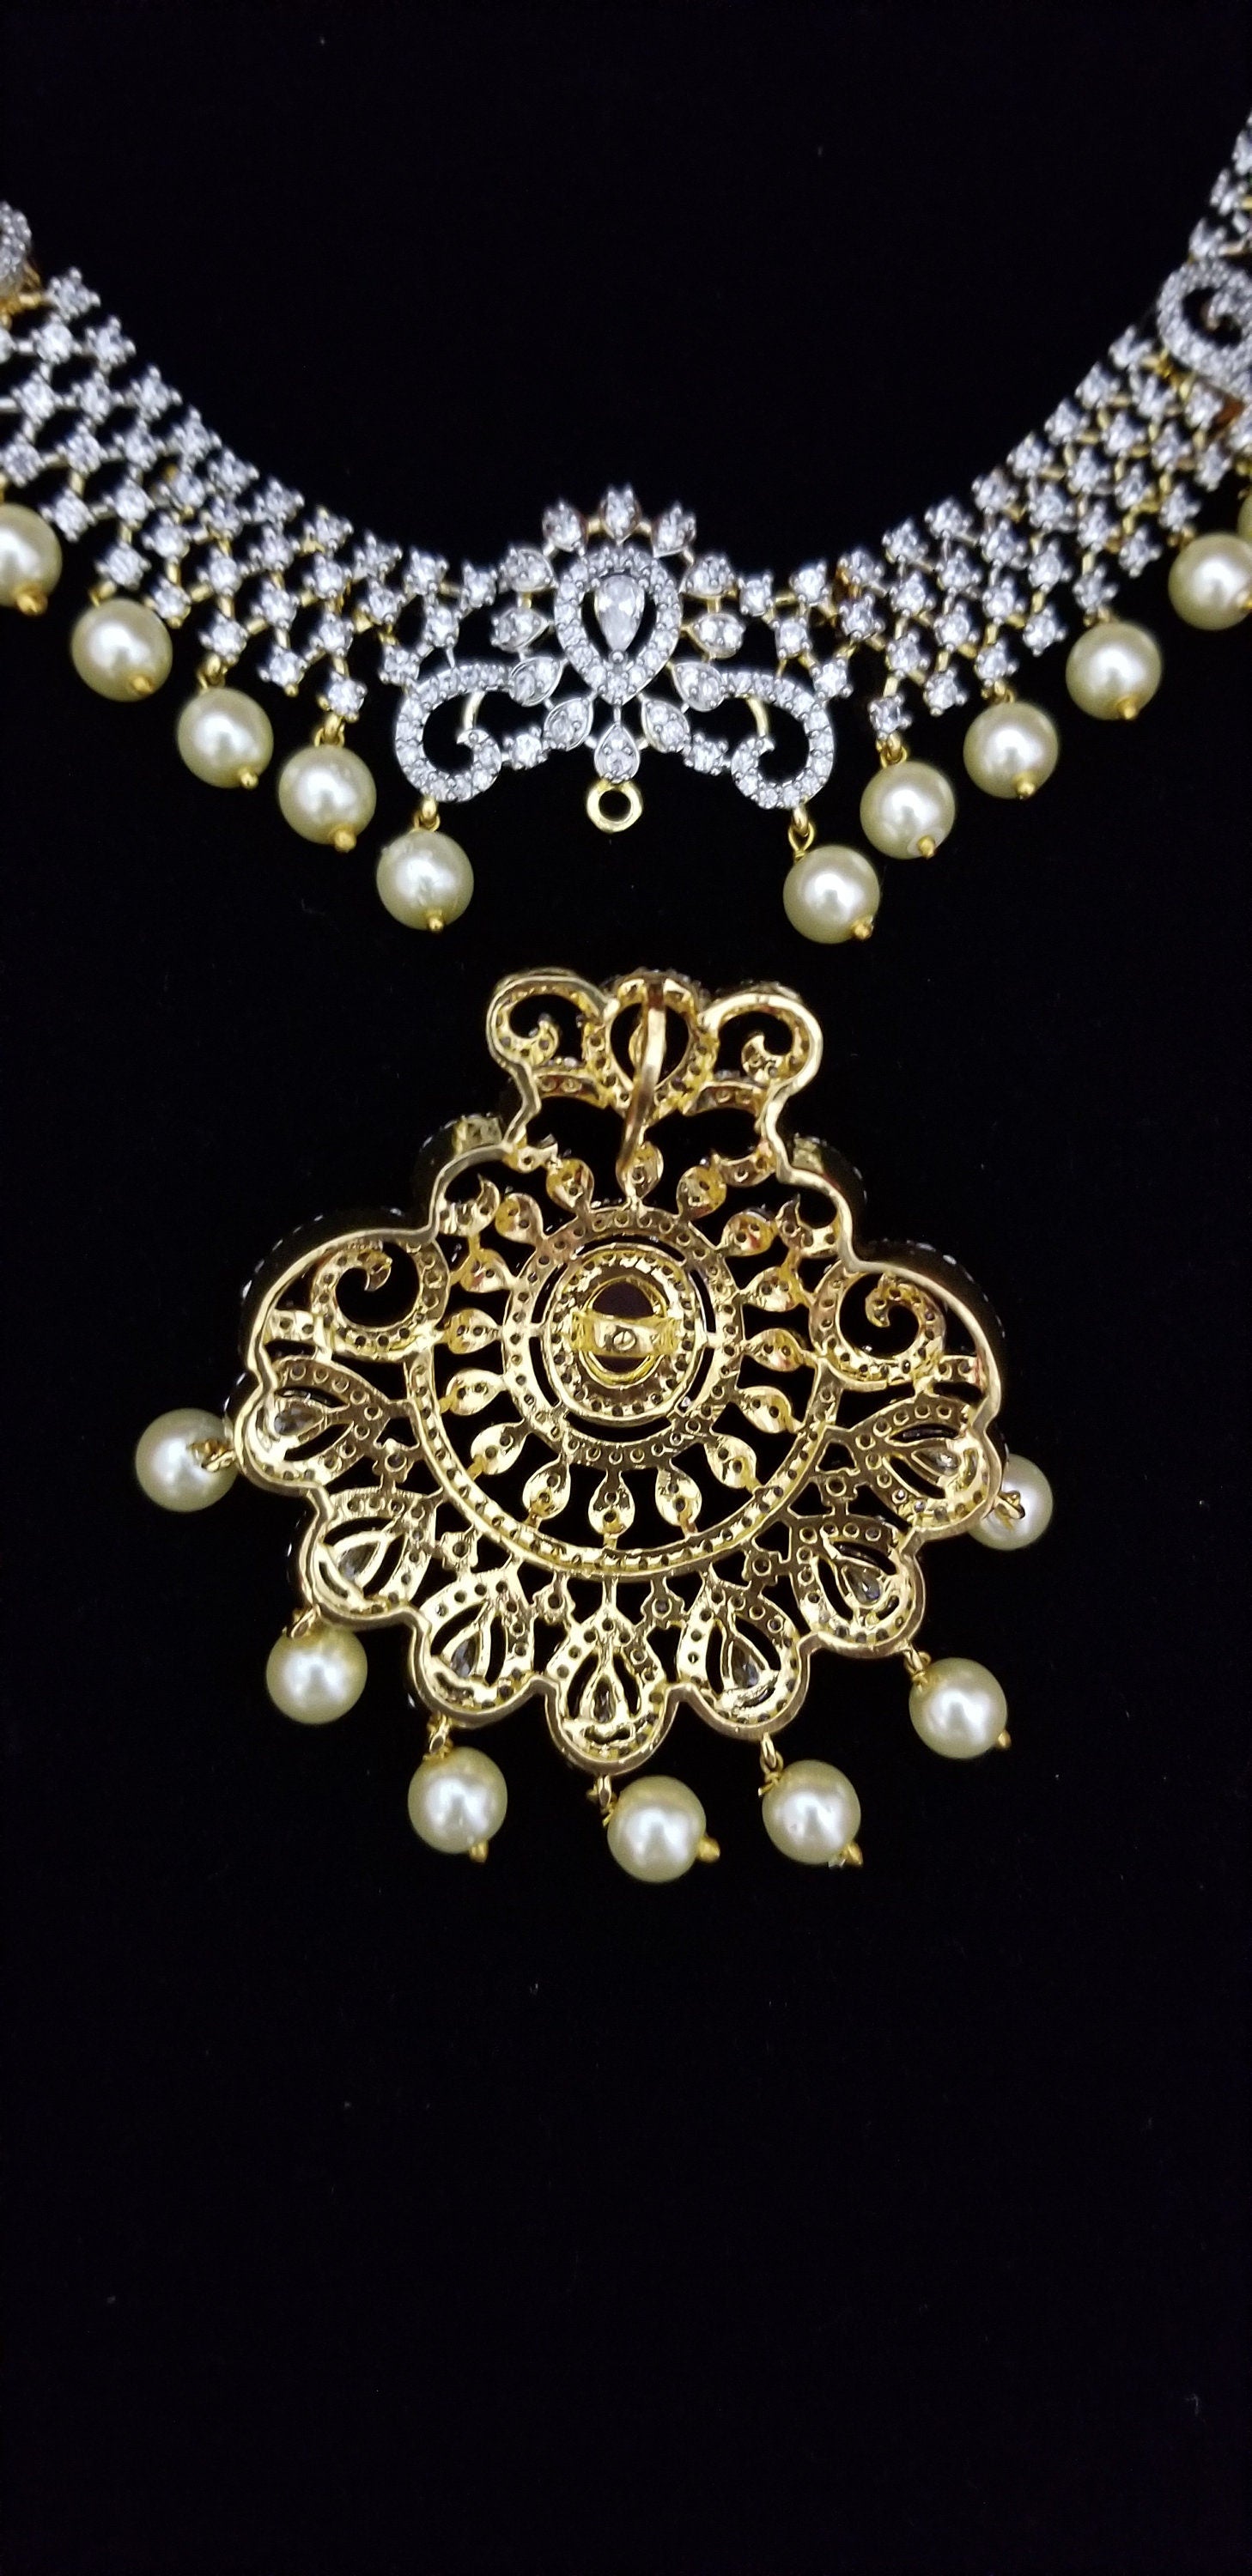 Premium Gold finish White with Pink AD Stone Necklace (Removable Pendent) with matching Jhumki